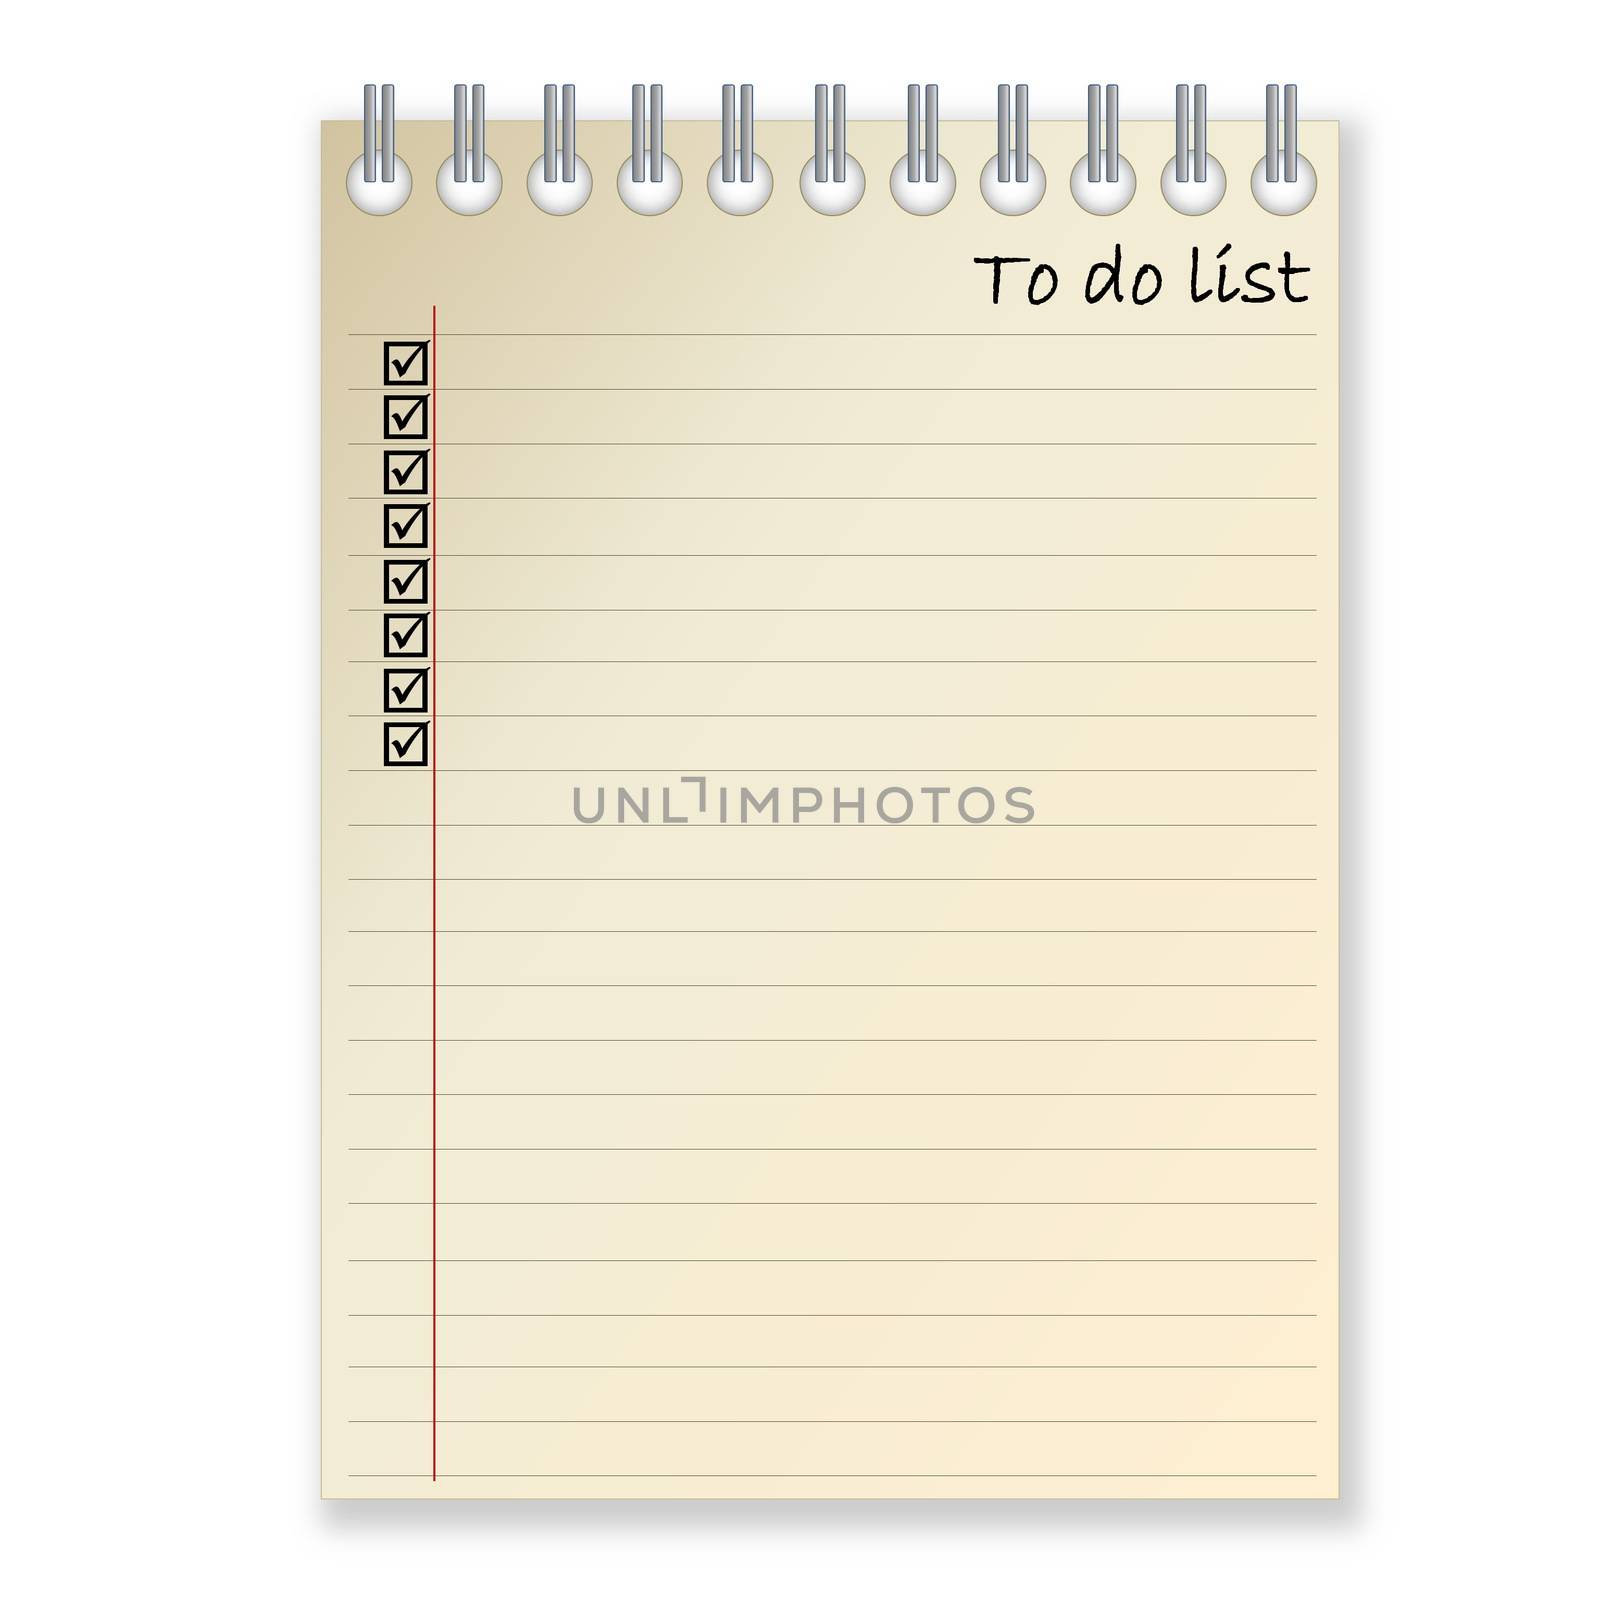 Notebook for writing things to do in white background